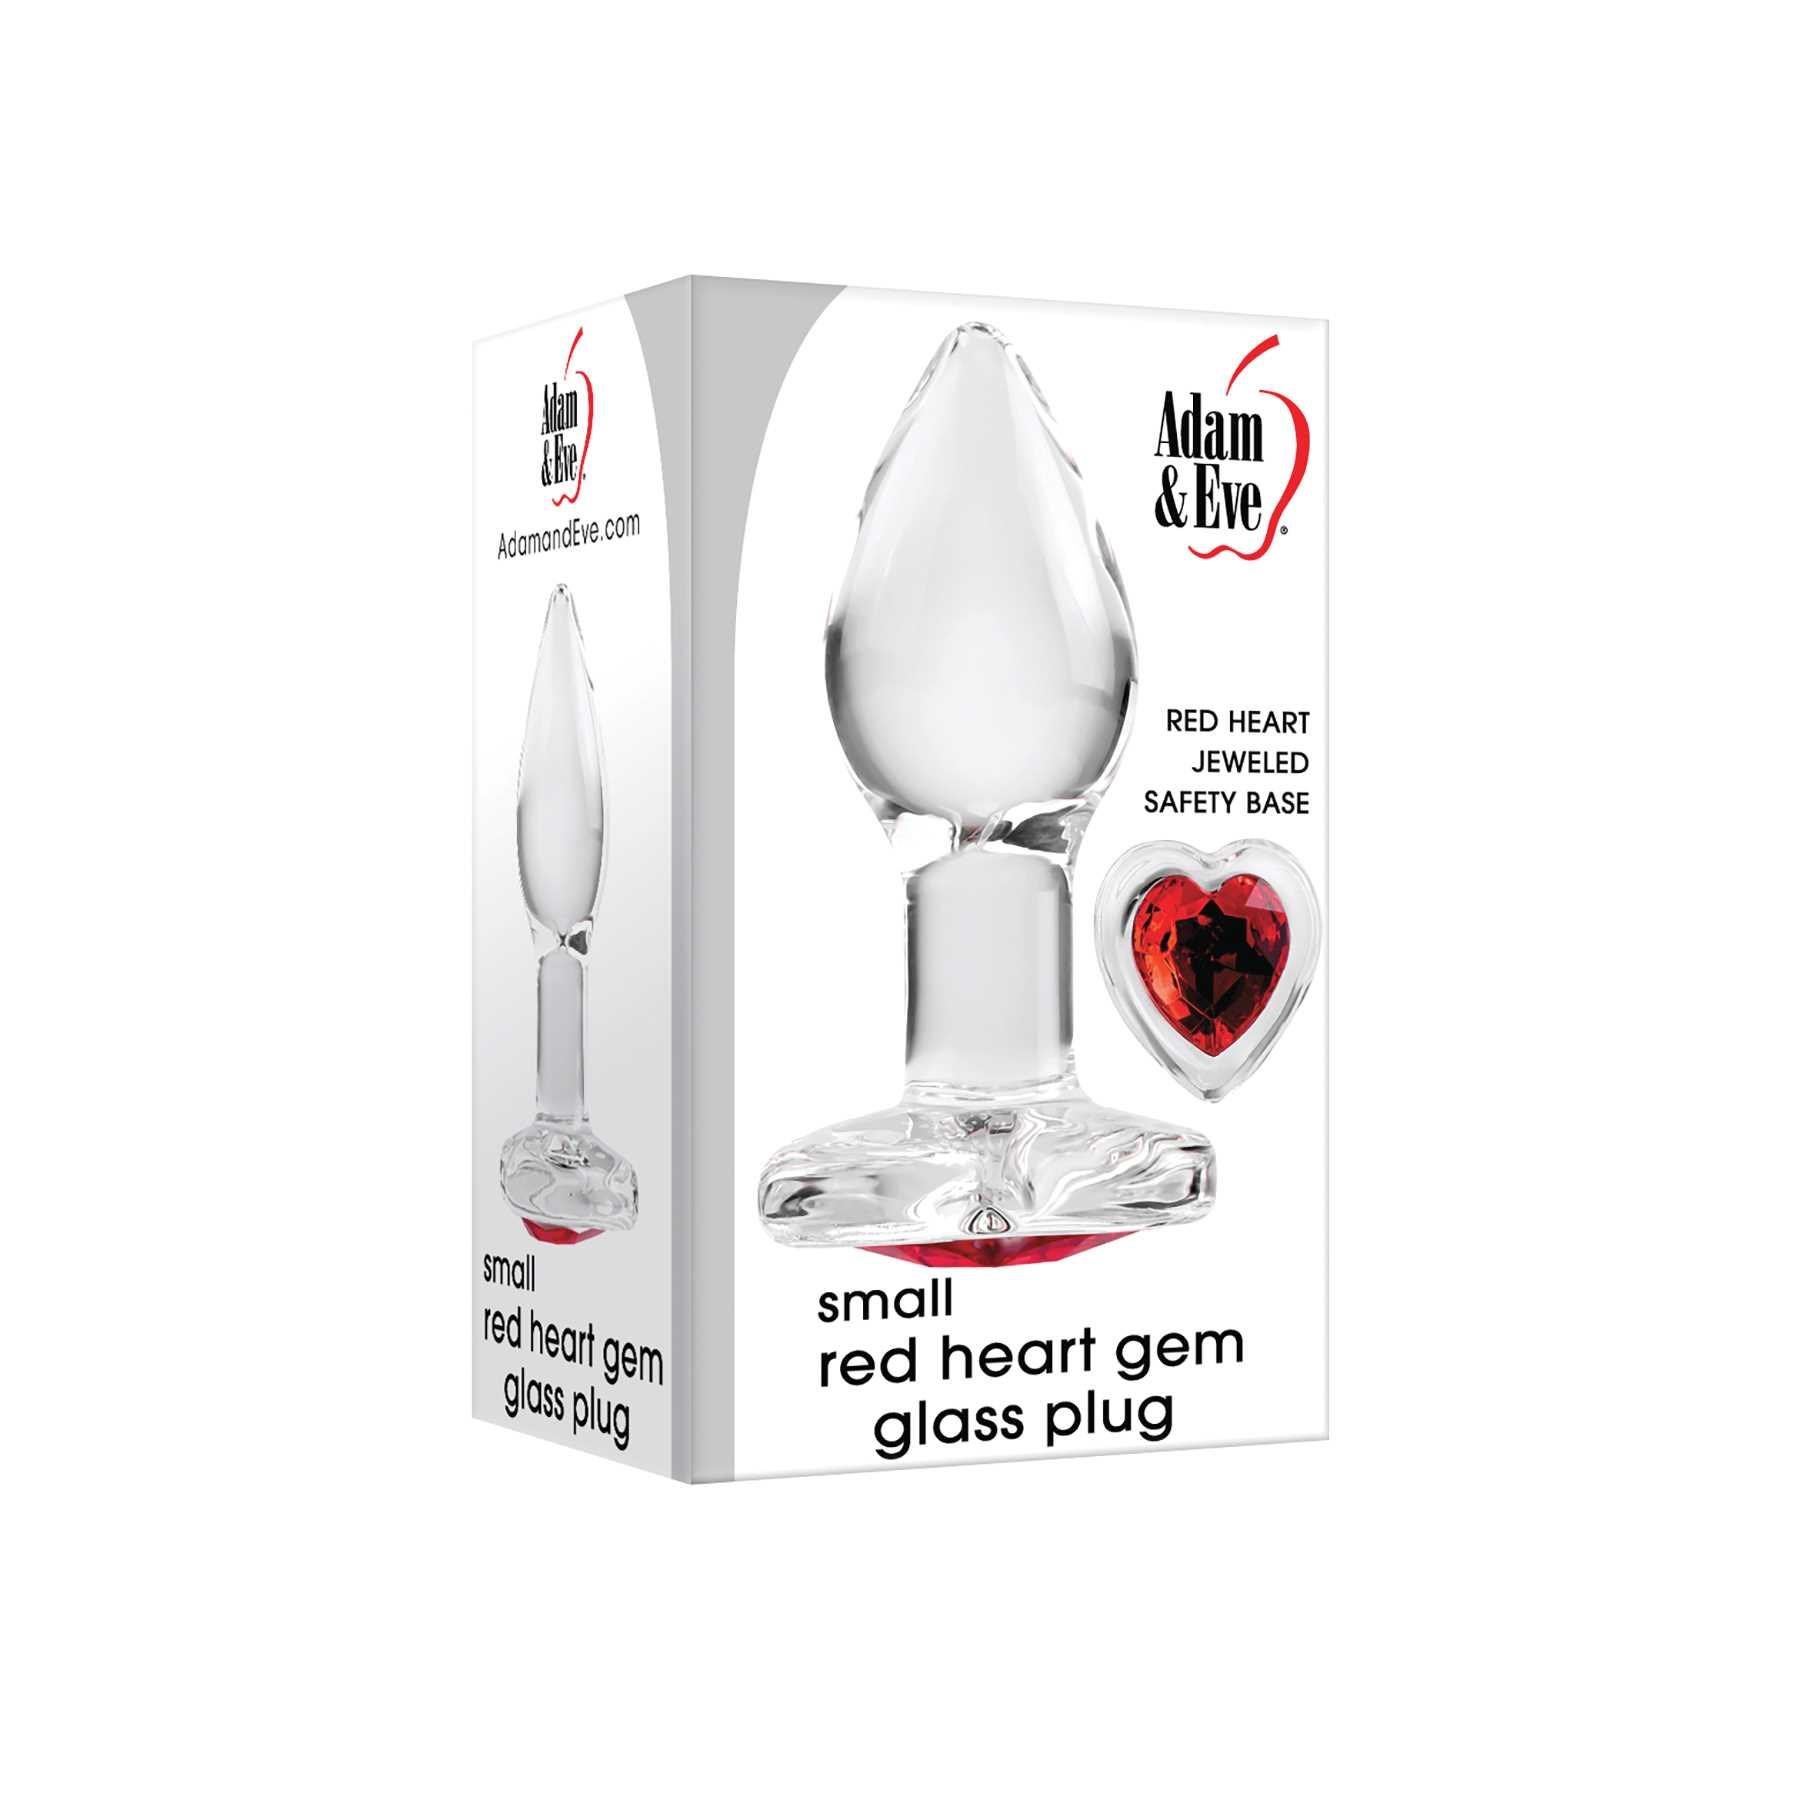 Red Heart Gem Glass Plug small box packaging